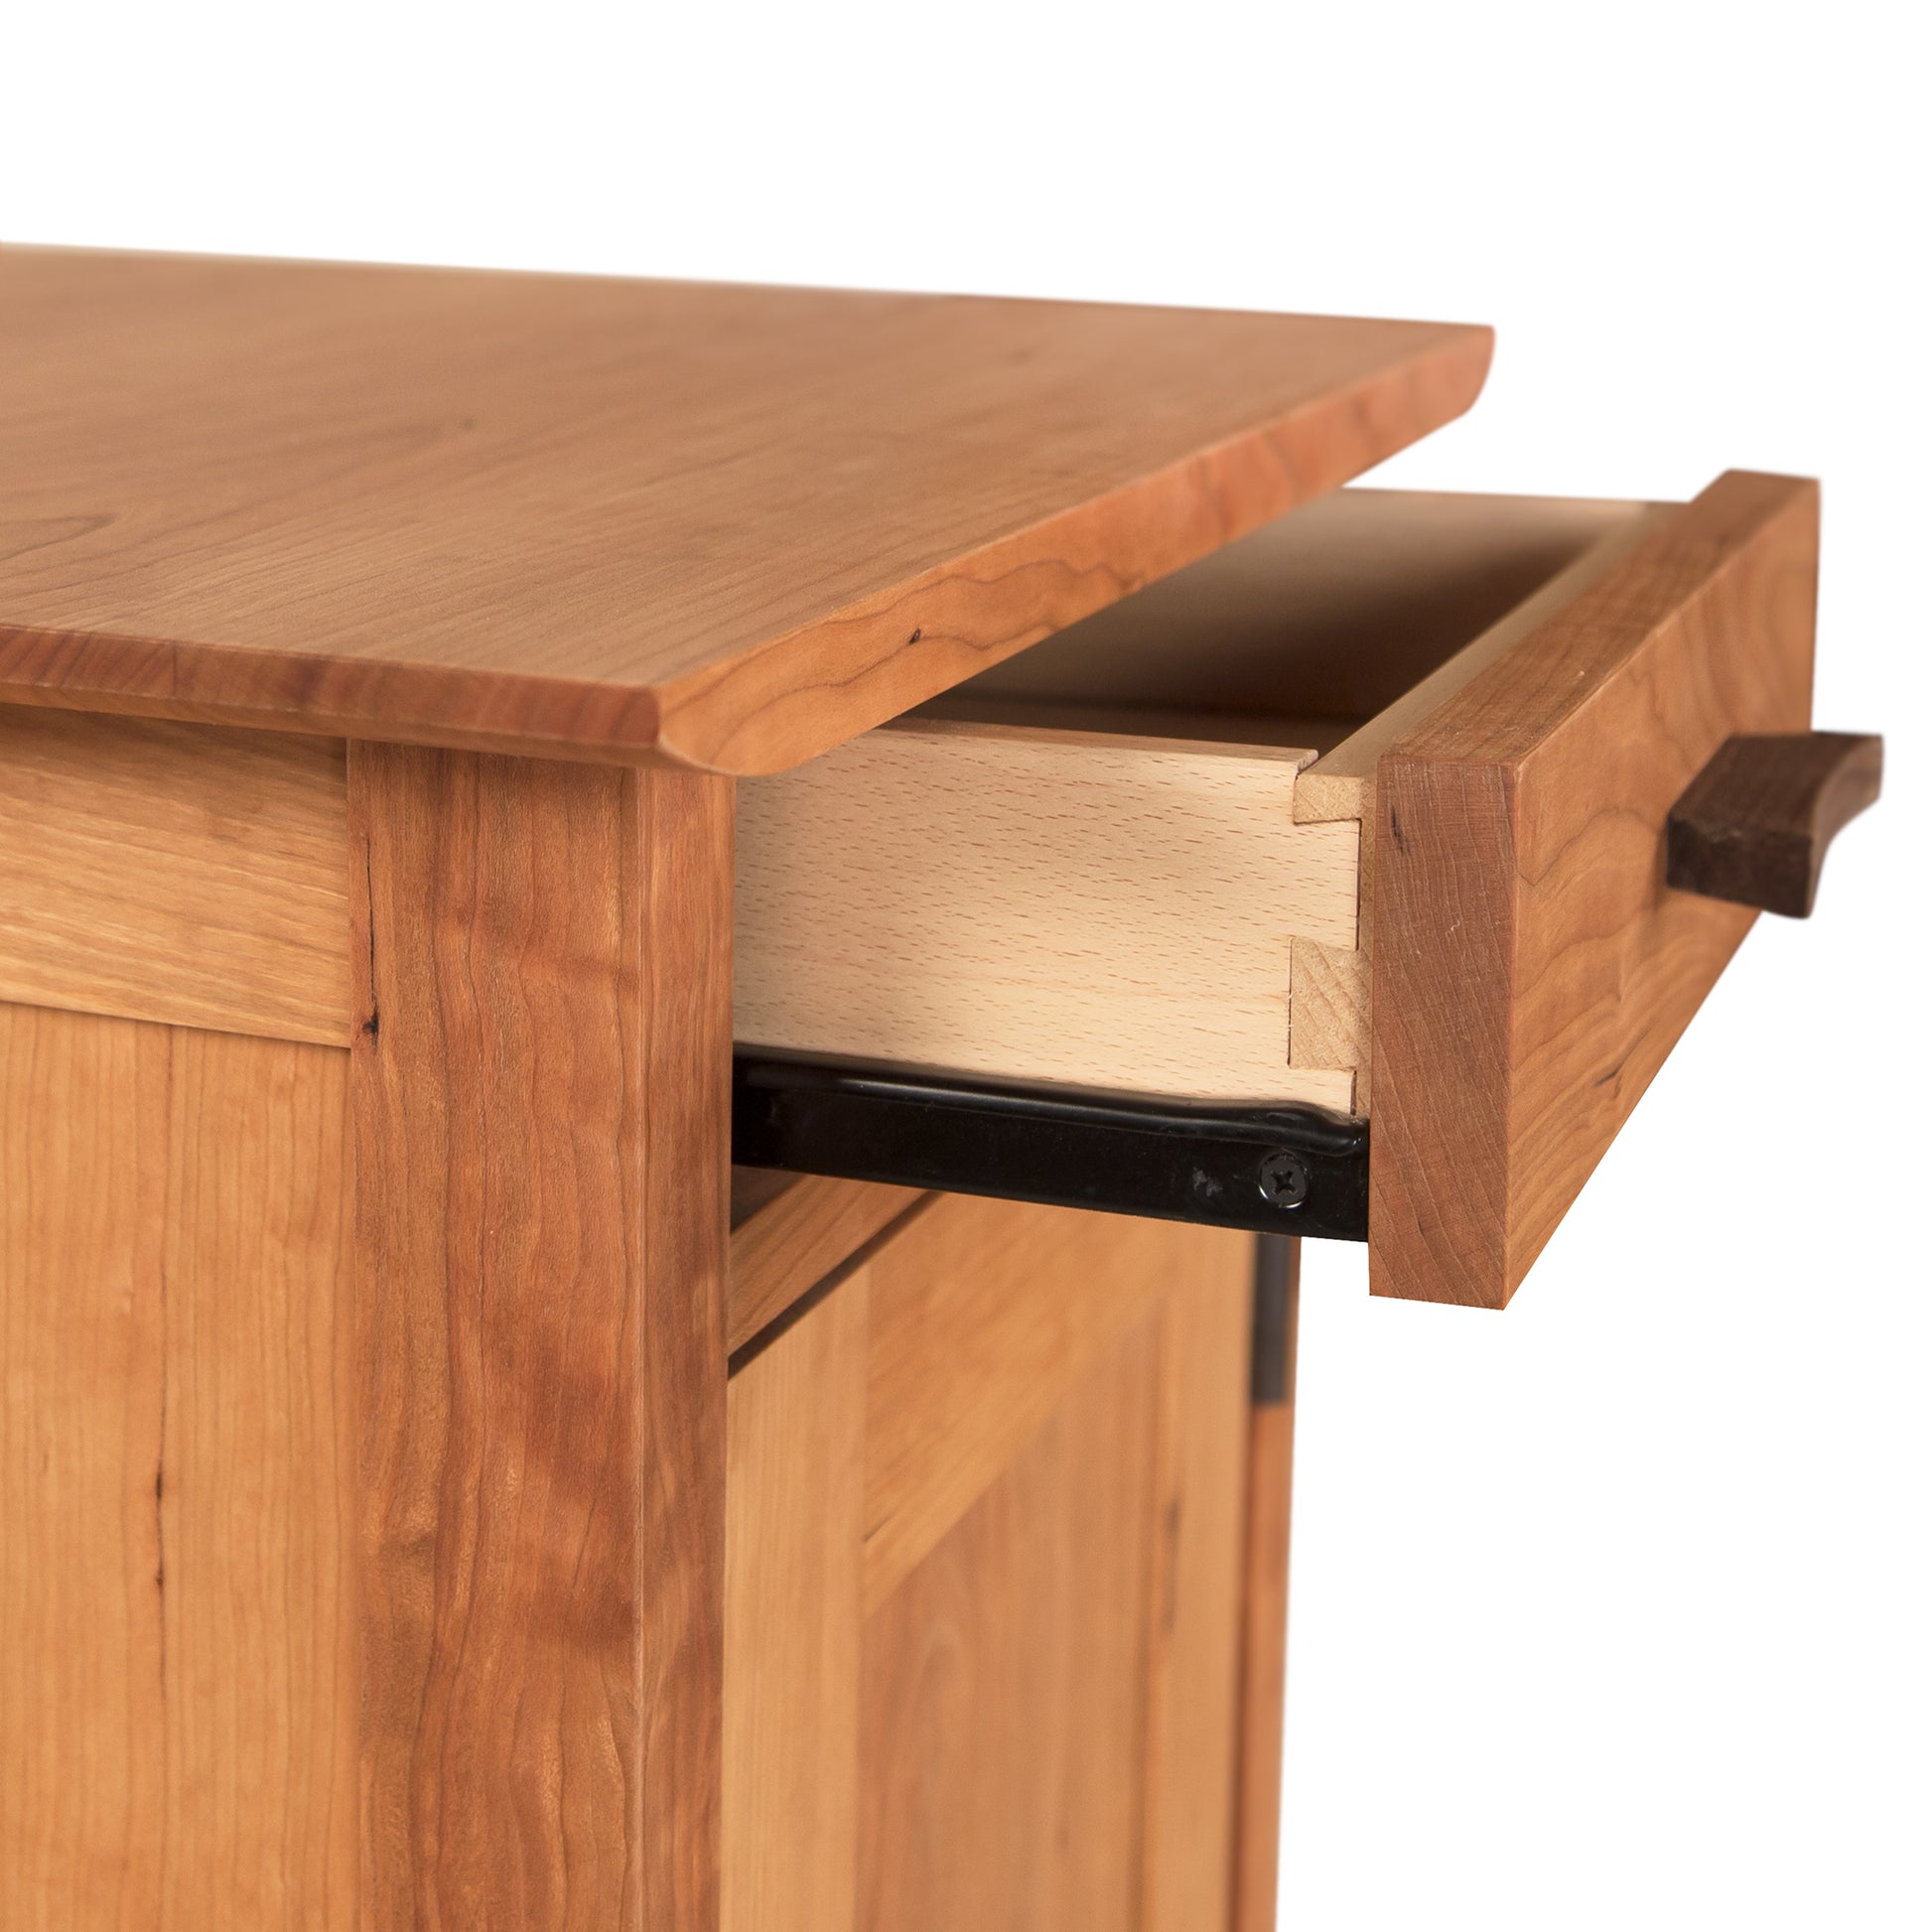 Partially opened wooden drawer of a Vermont Furniture Designs Contemporary Craftsman 1-Drawer Nightstand with Door showing dovetail joints and a metal slide mechanism with an eco-friendly oil finish.